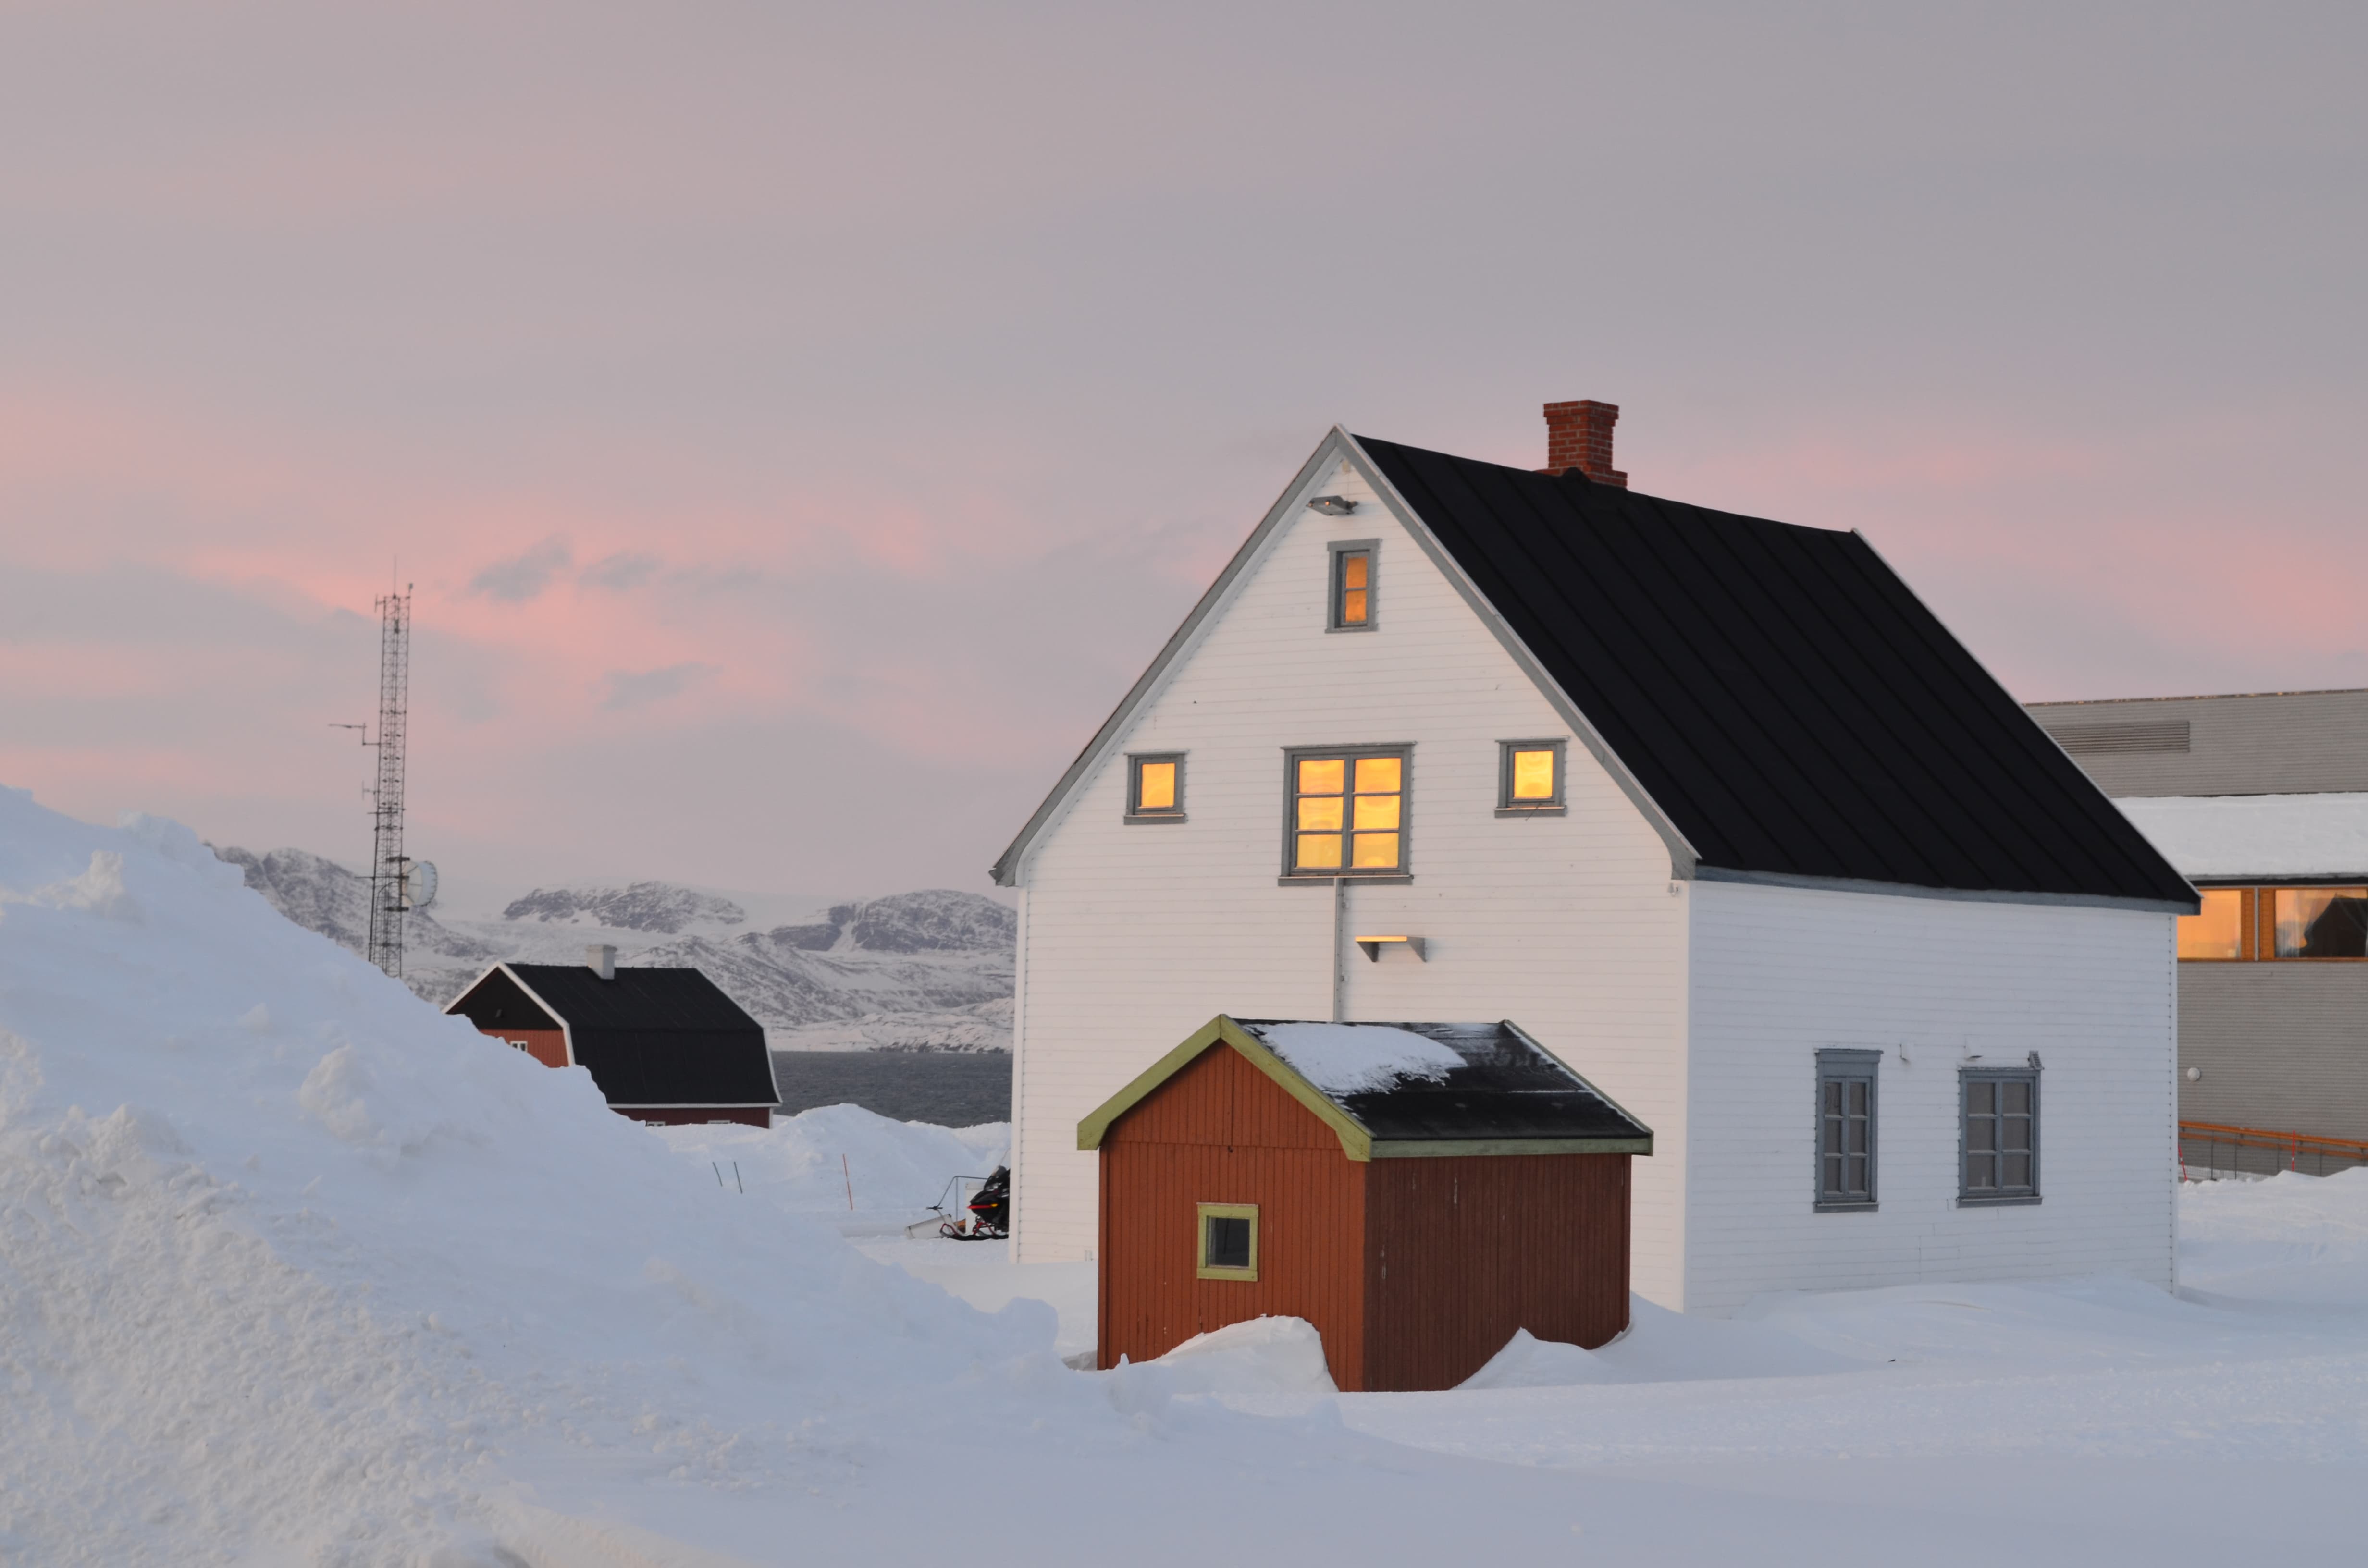 A house in the middle of a snowy landscape in Ny-Ålesund, in Northern Spitsbergen.